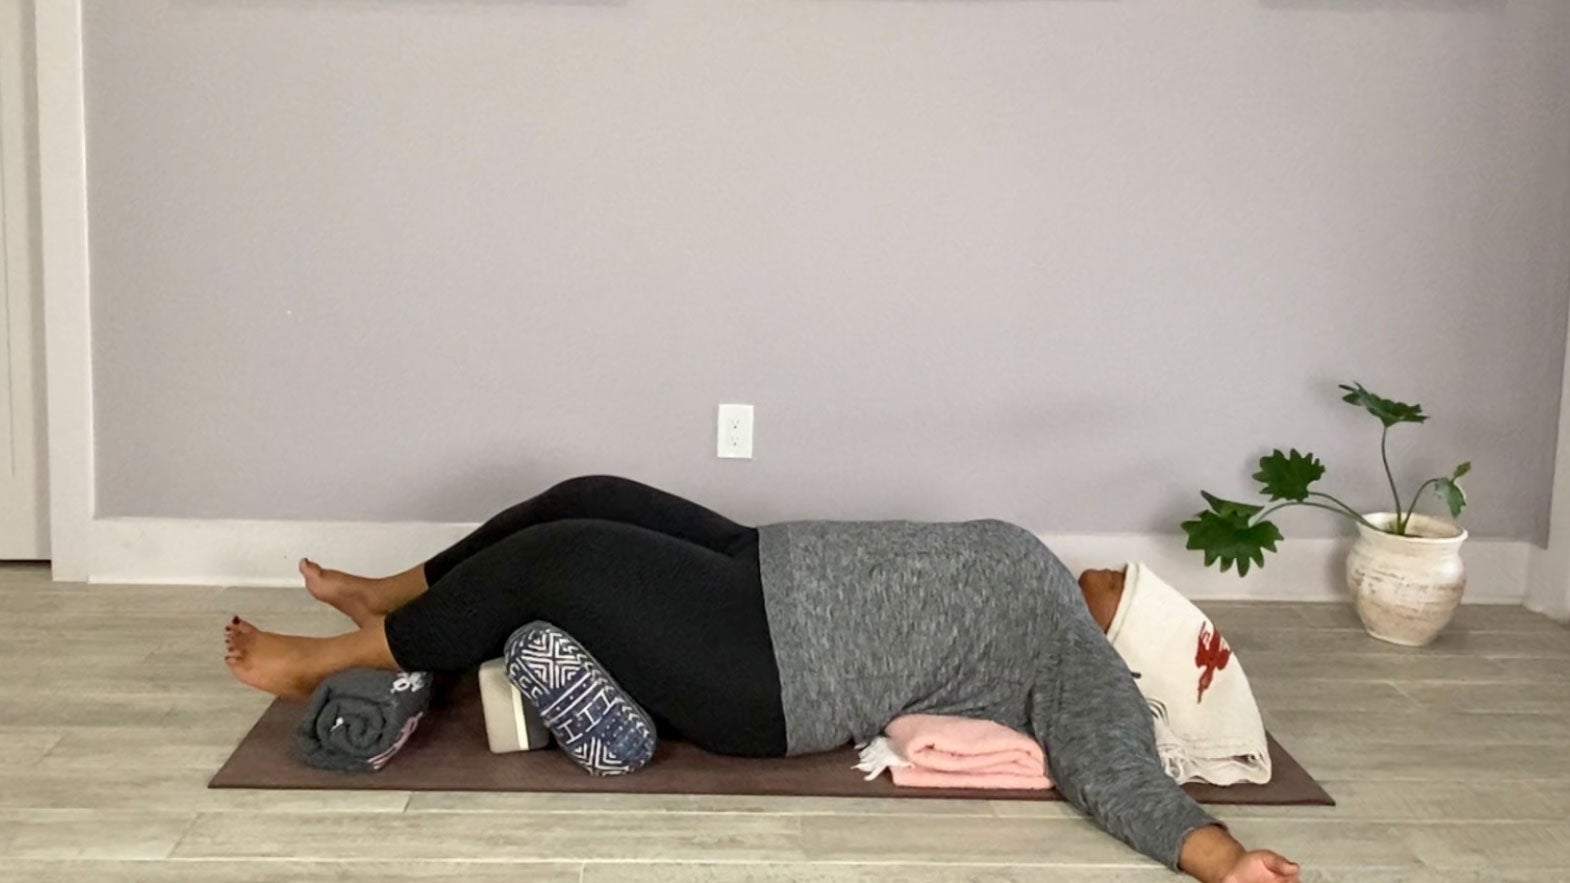 Restorative Yoga Postures to Help You Feel Grounded and Connected - DoYou